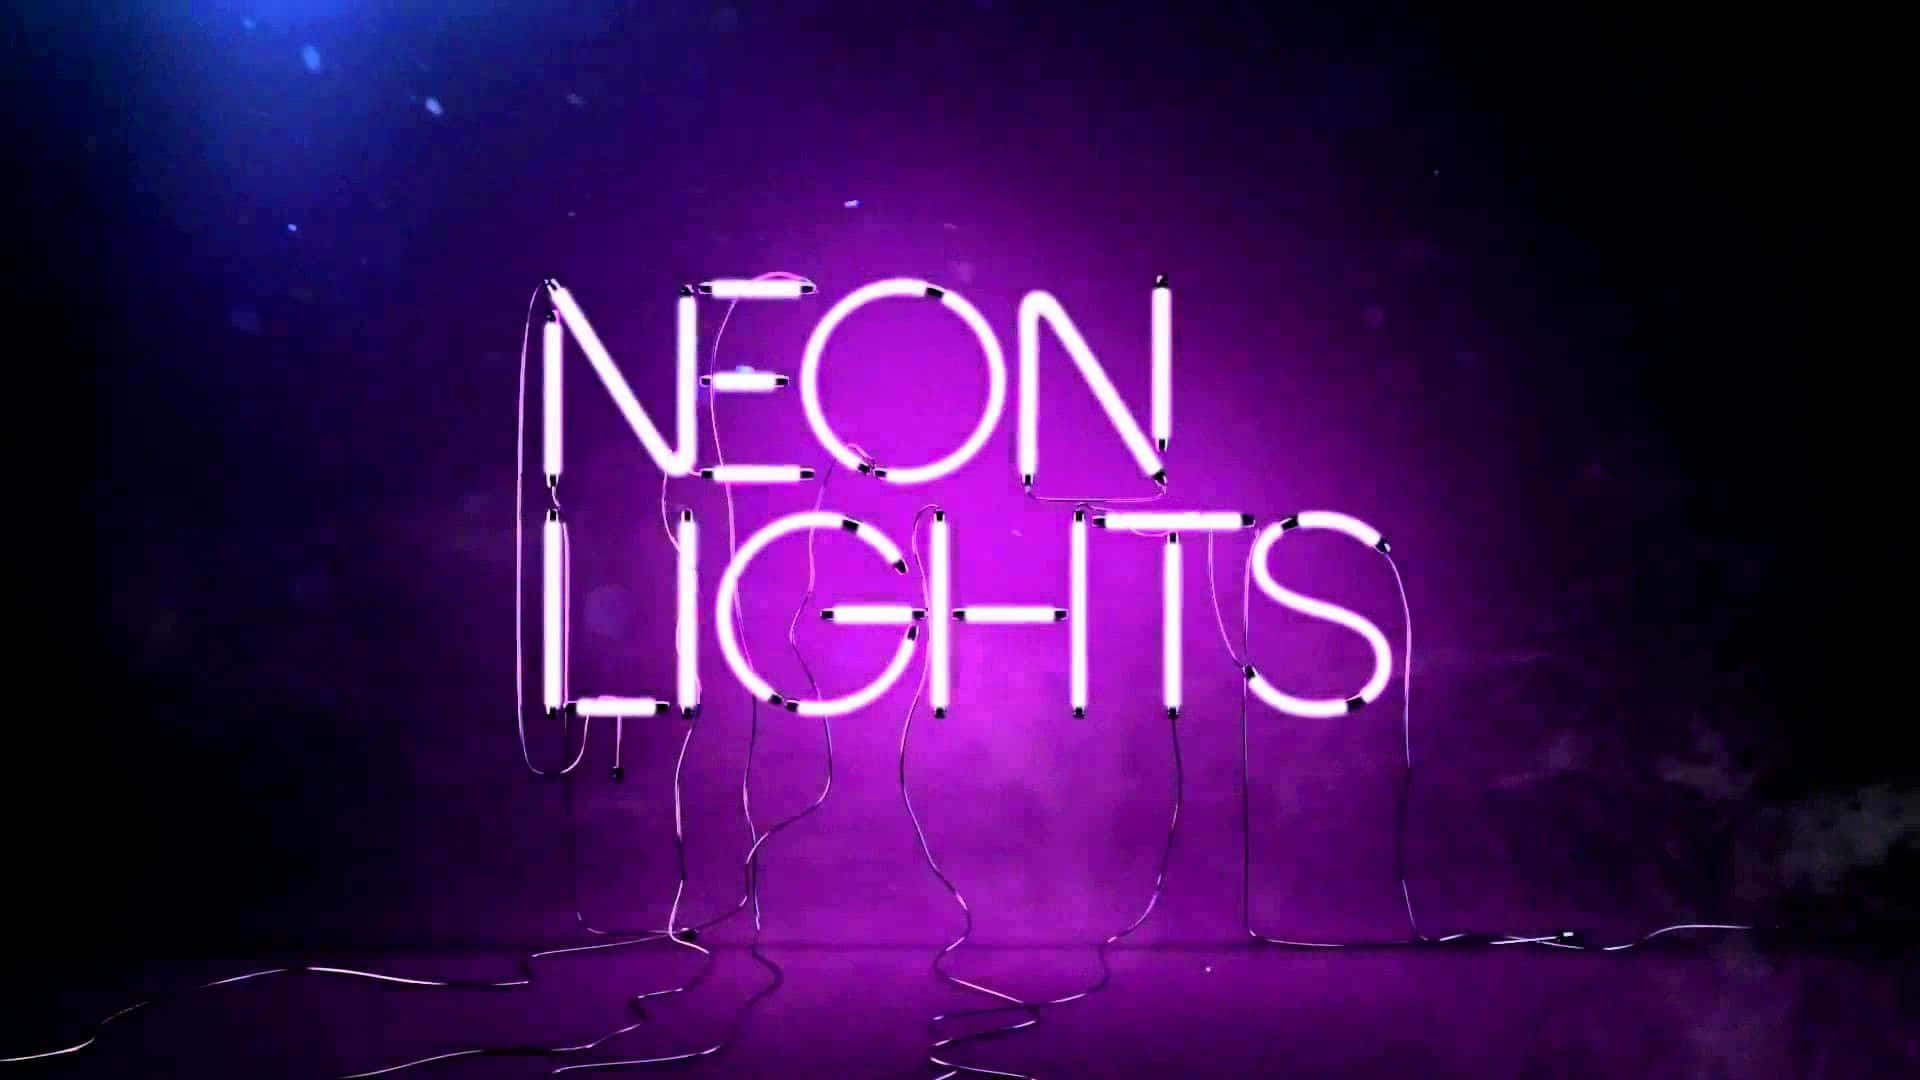 Neon Lights - A Neon Sign With A Purple Background Wallpaper